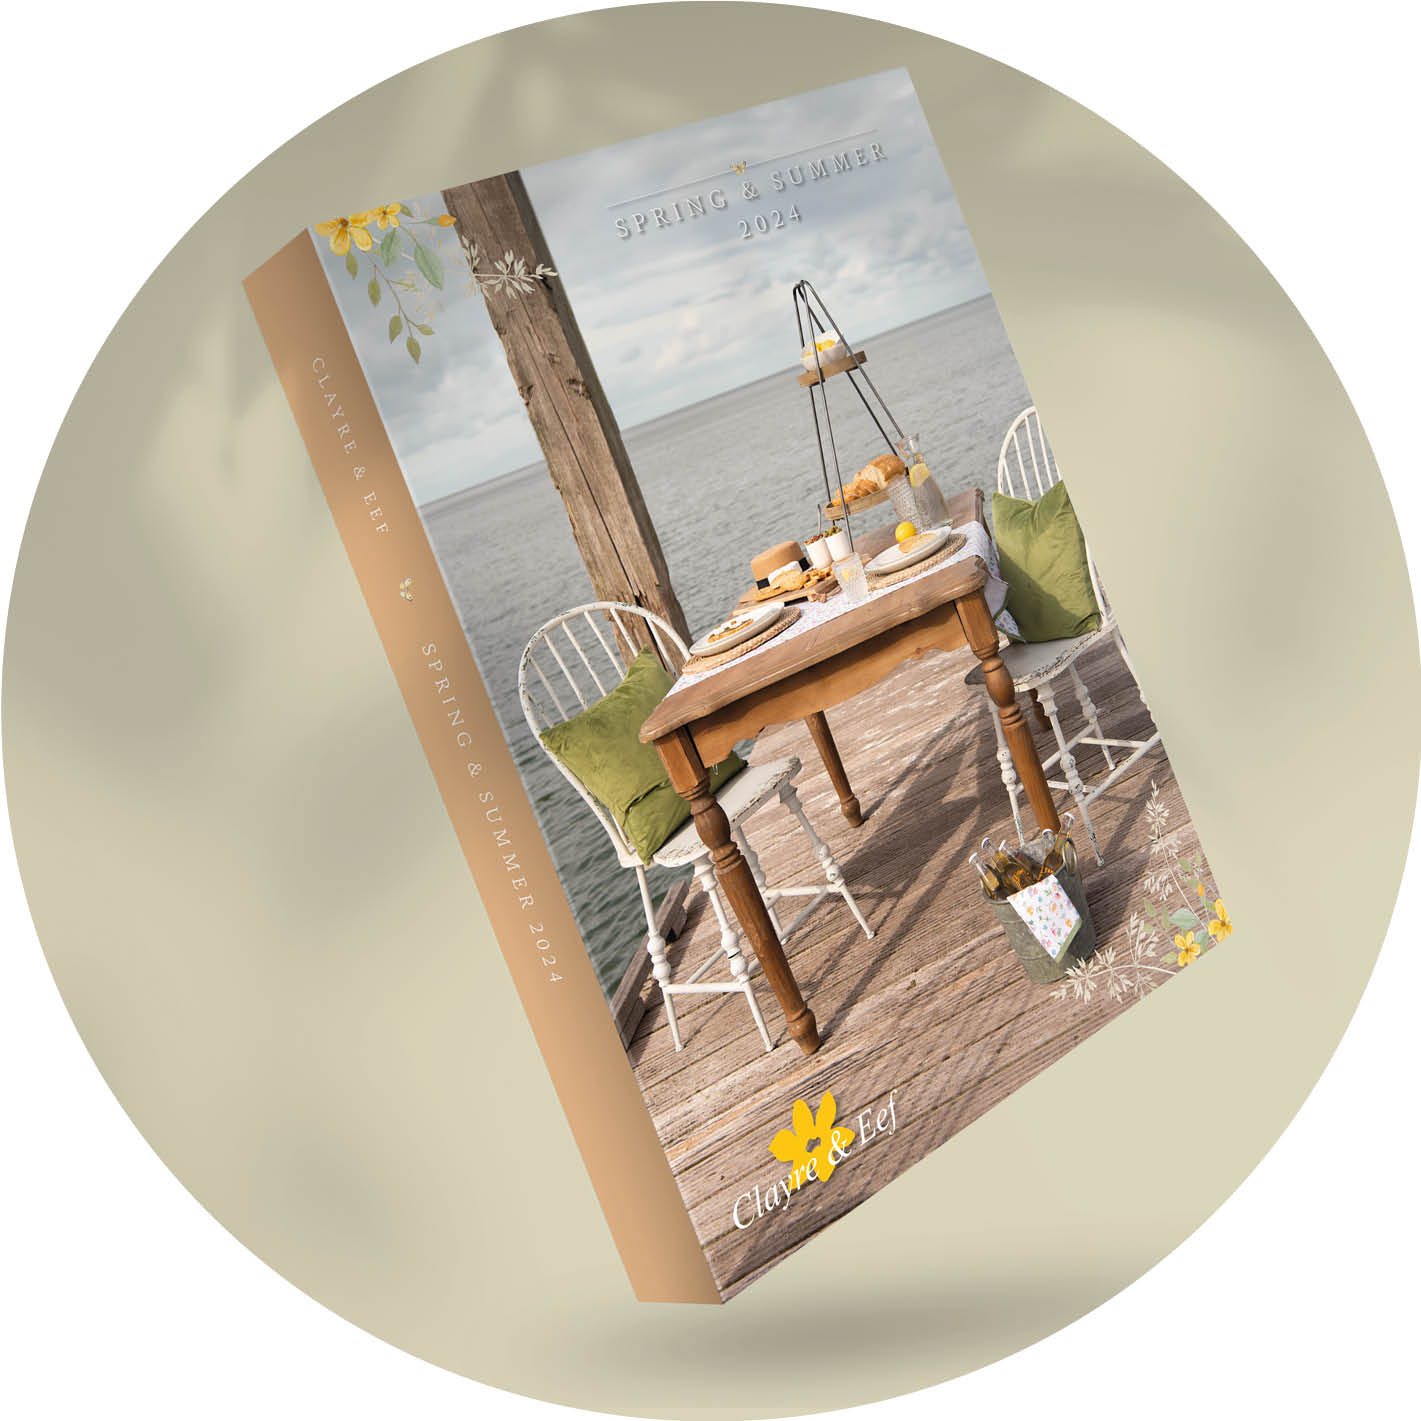 The image shows a catalog focusing on the Spring and Summer collection of 2024. On the cover of the catalog is an atmospheric setting of an outdoor table with chairs on a wooden pier. The table is set with plates and cutlery. The scene suggests a relaxed outdoor meal overlooking the water. The corner of the page displays the text "Spring & Summer 2024." At the bottom is the logo of 'Clayre & Eef'. The design is soft with a beige-yellow hue that complements the spring/summer theme.